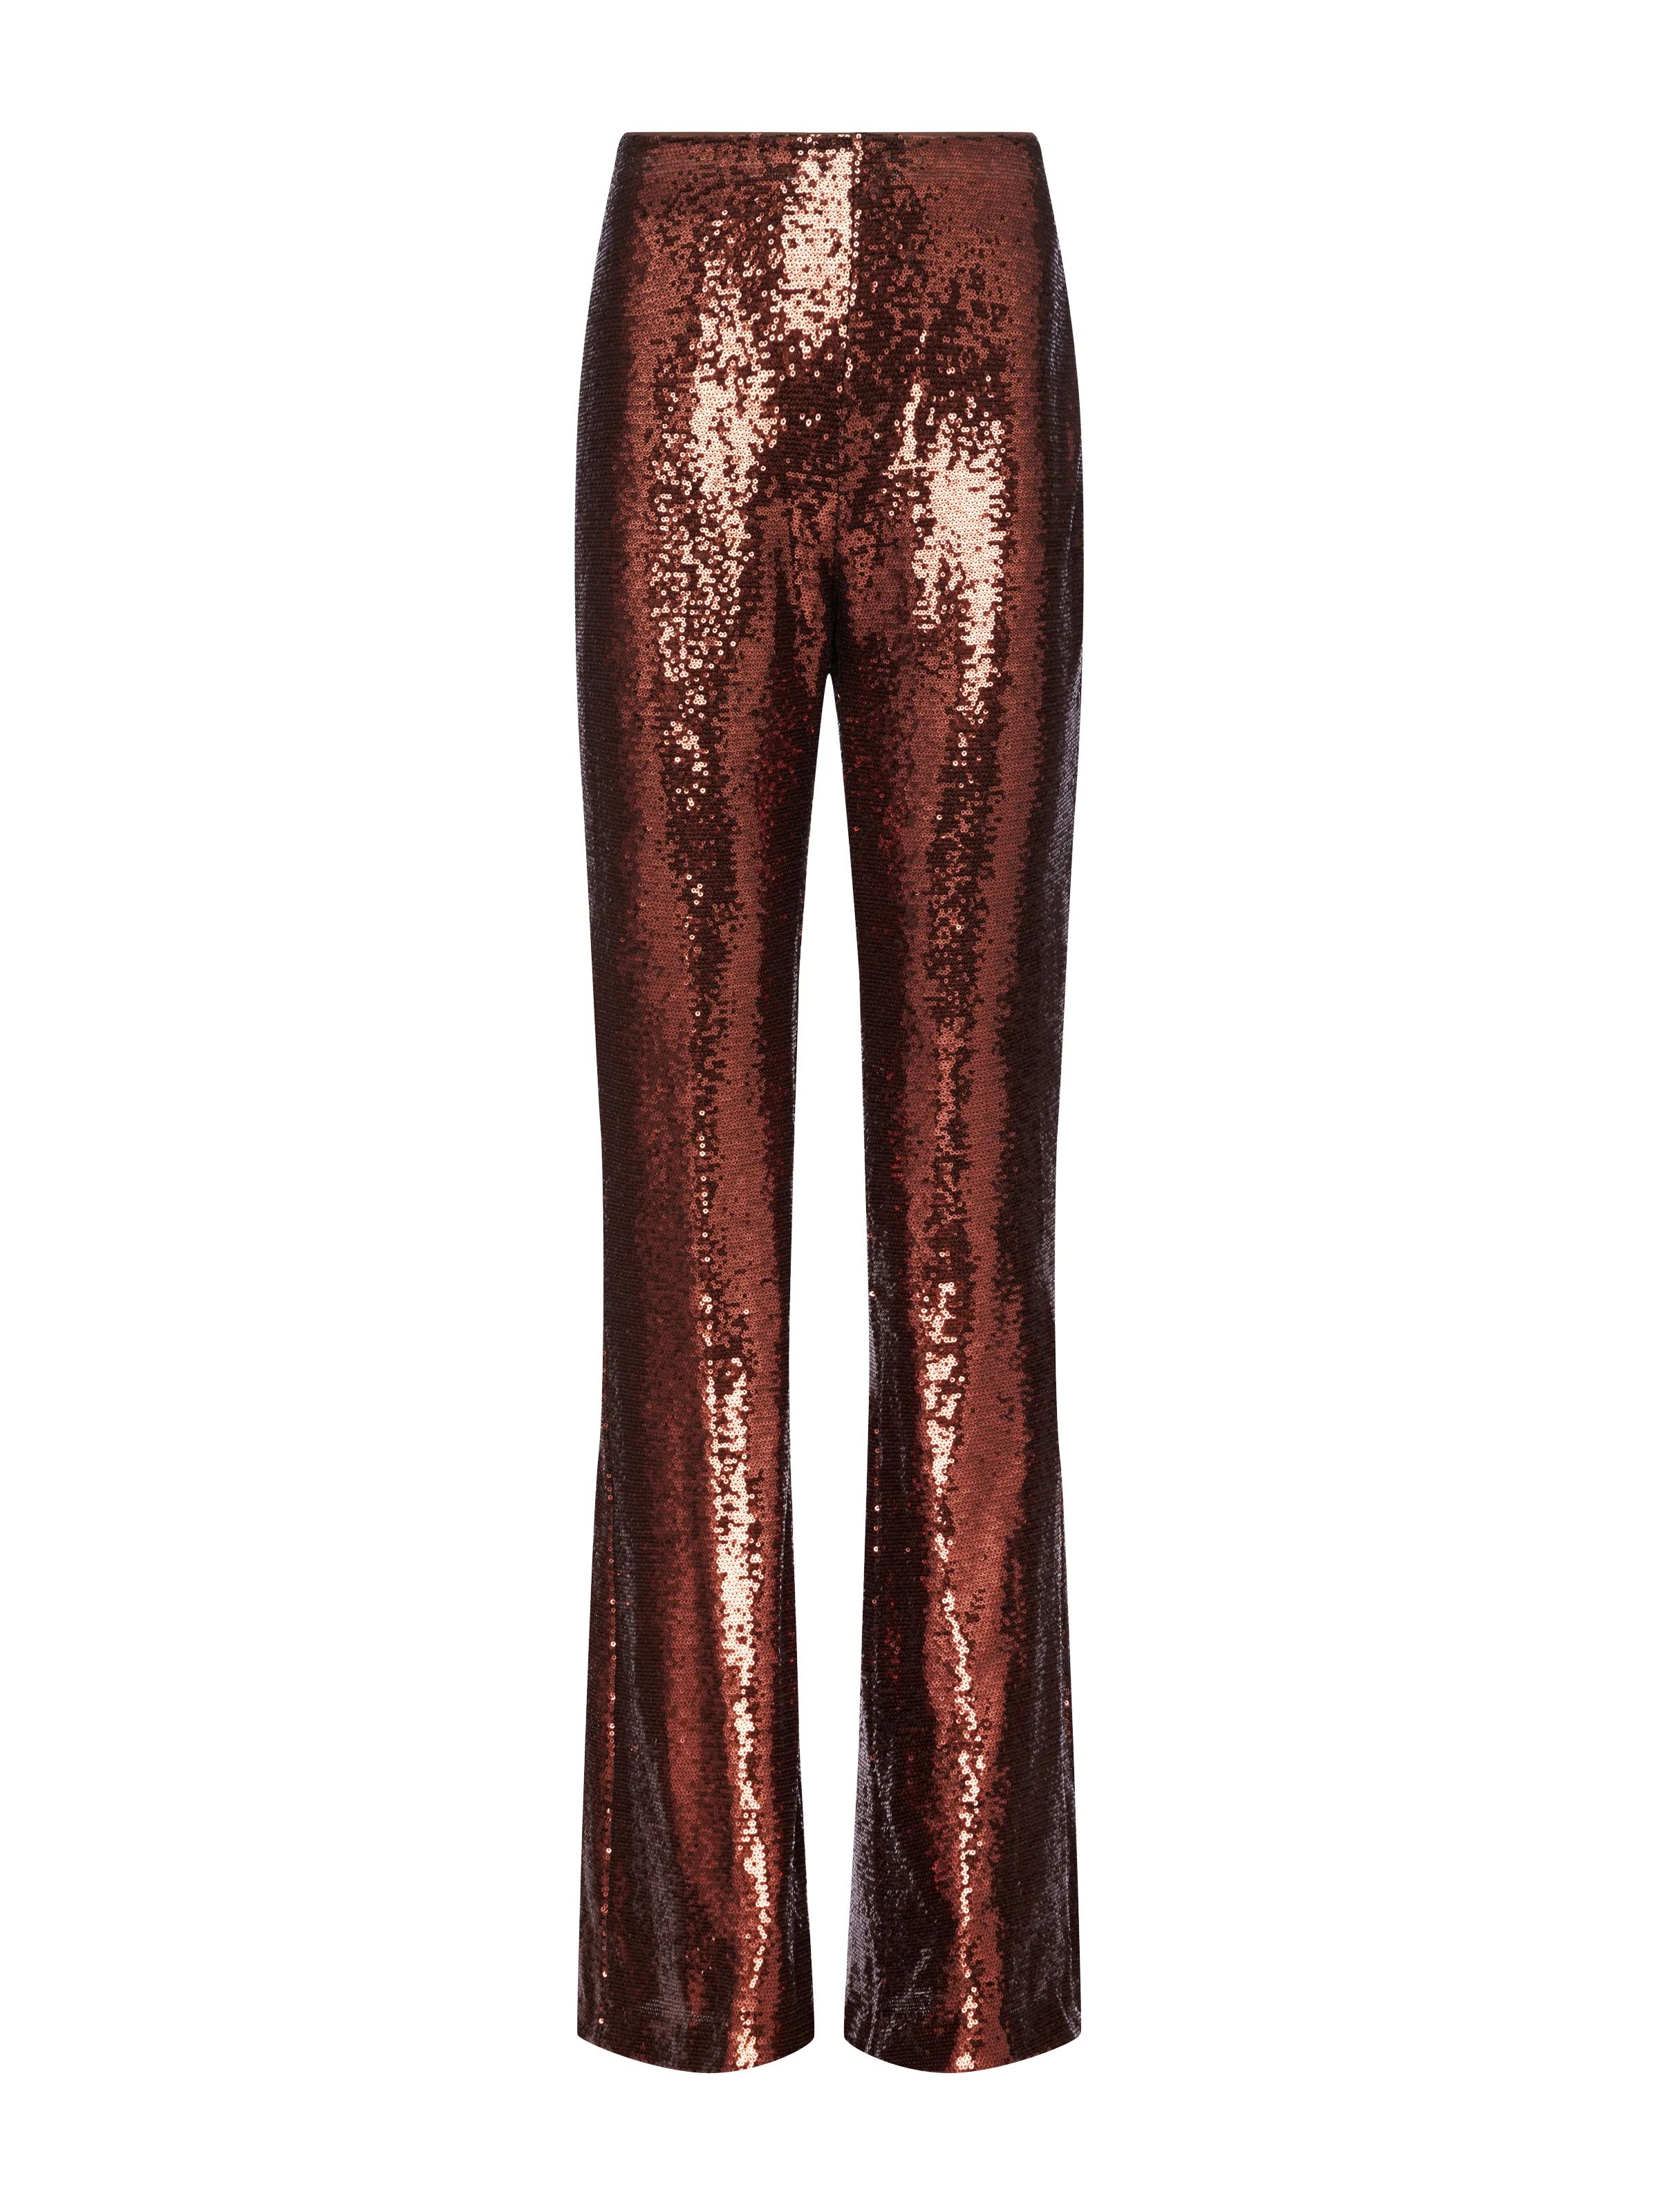 L'AGENCE Honor Pant in Bronze | L'Agence